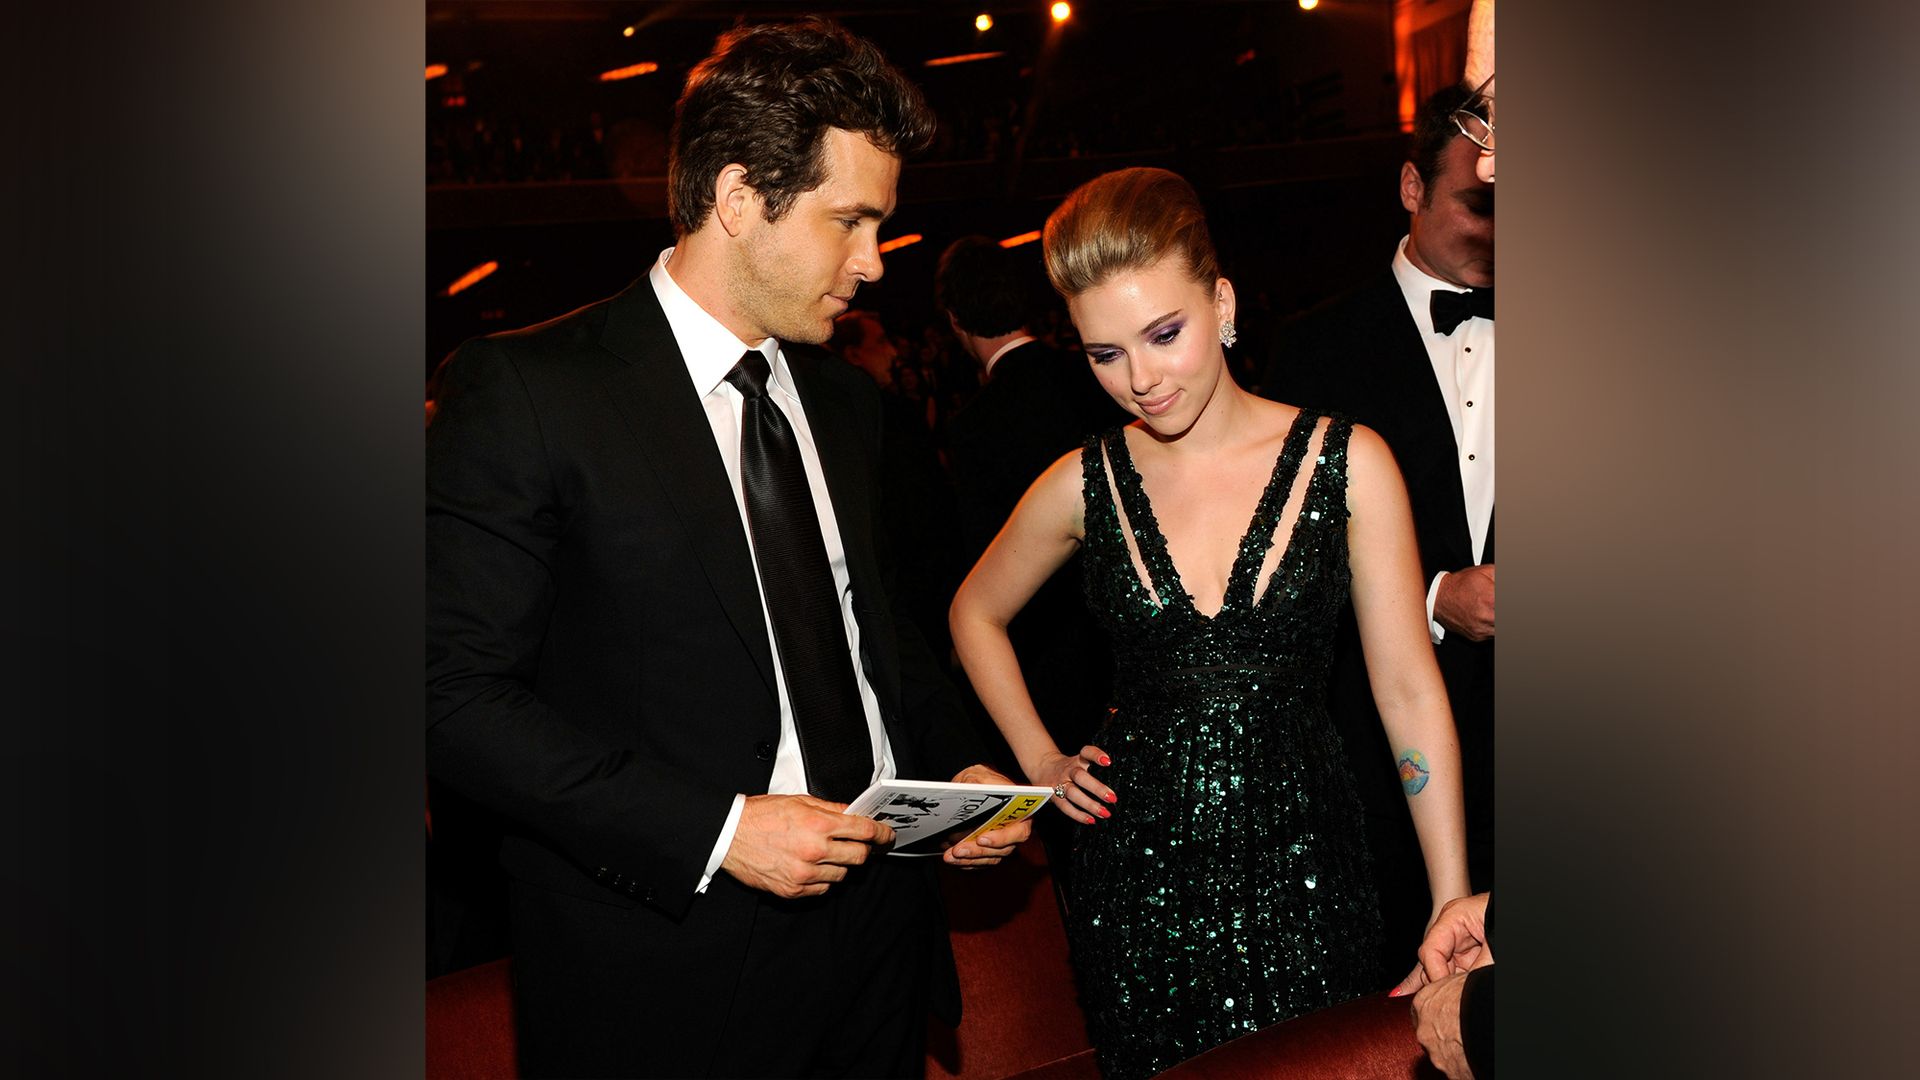 Ryan Reynolds and Scarlett Johansson divorced two year after marriage